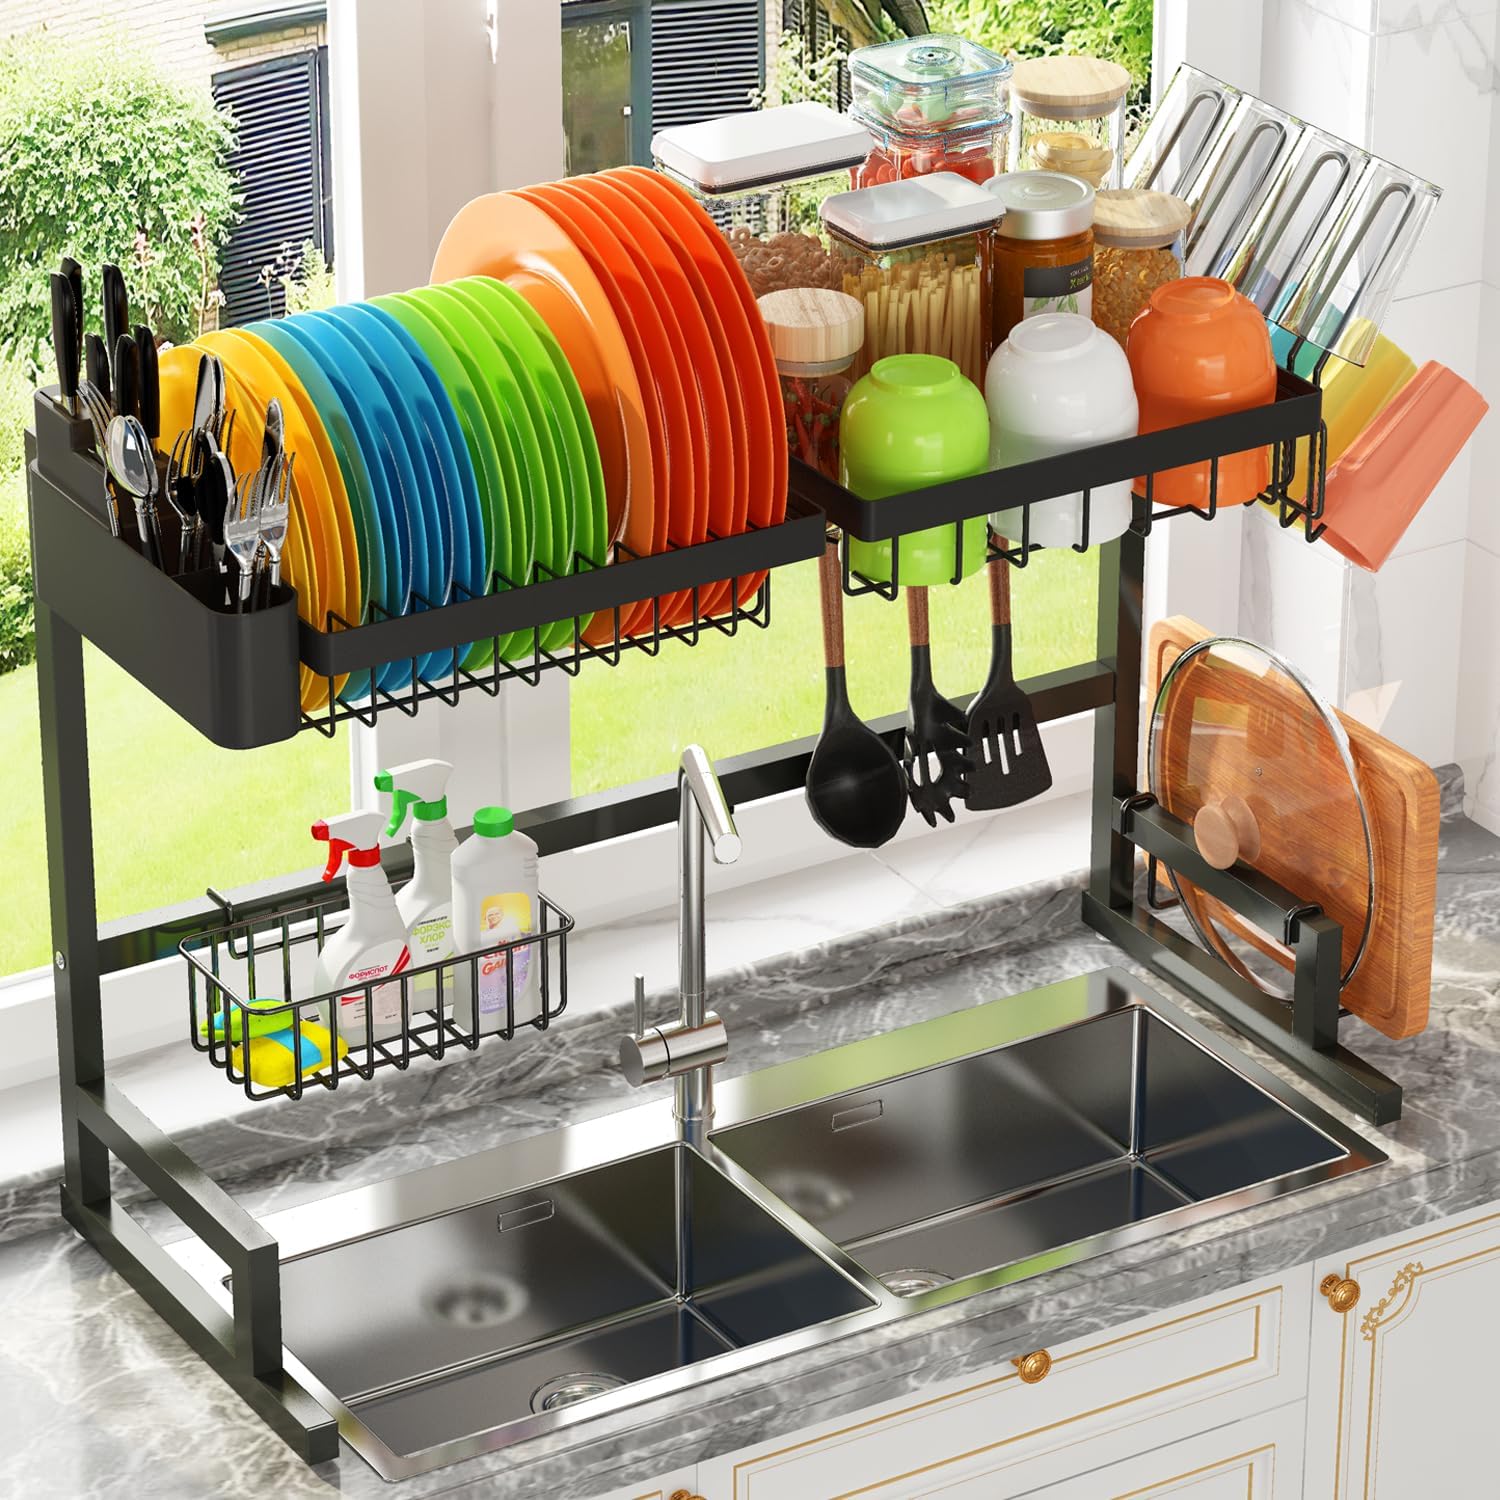 MERRYBOX Over The Sink Dish Drying Rack Adjustable Length (25-33in), 2 Tier  Dish Rack Over Sink with Multiple Baskets Utensil Holder Cup Holder, Full